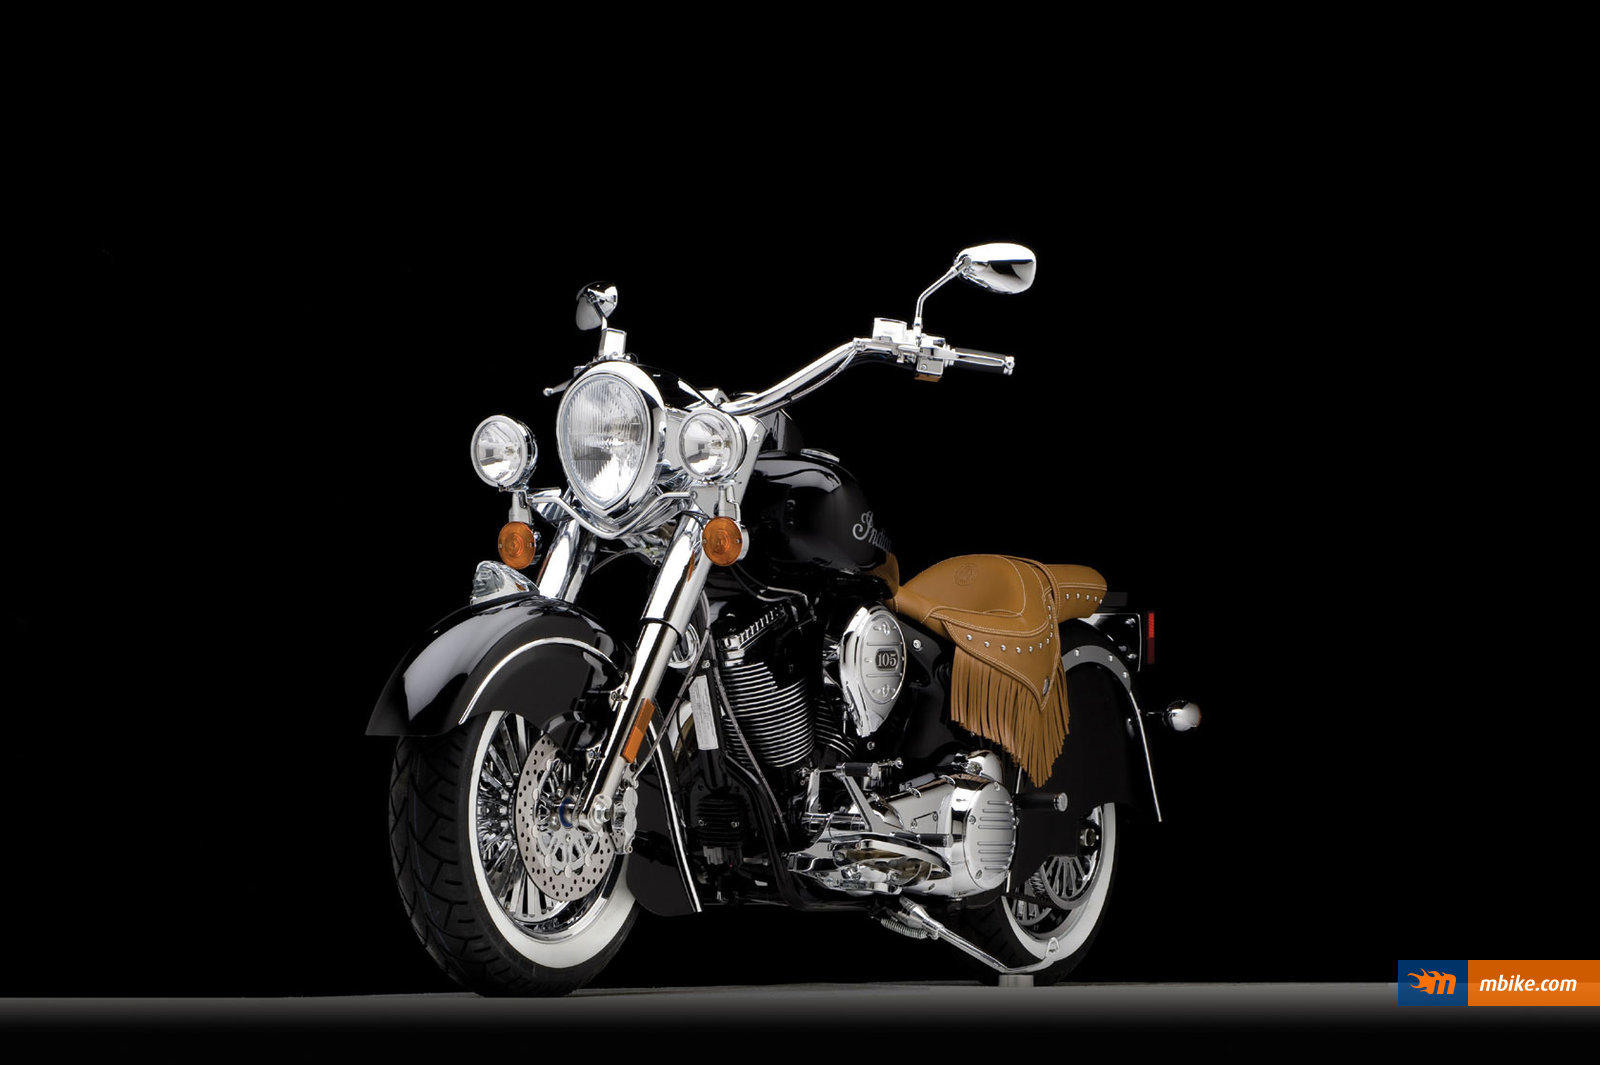 2009 Indian Chief Deluxe